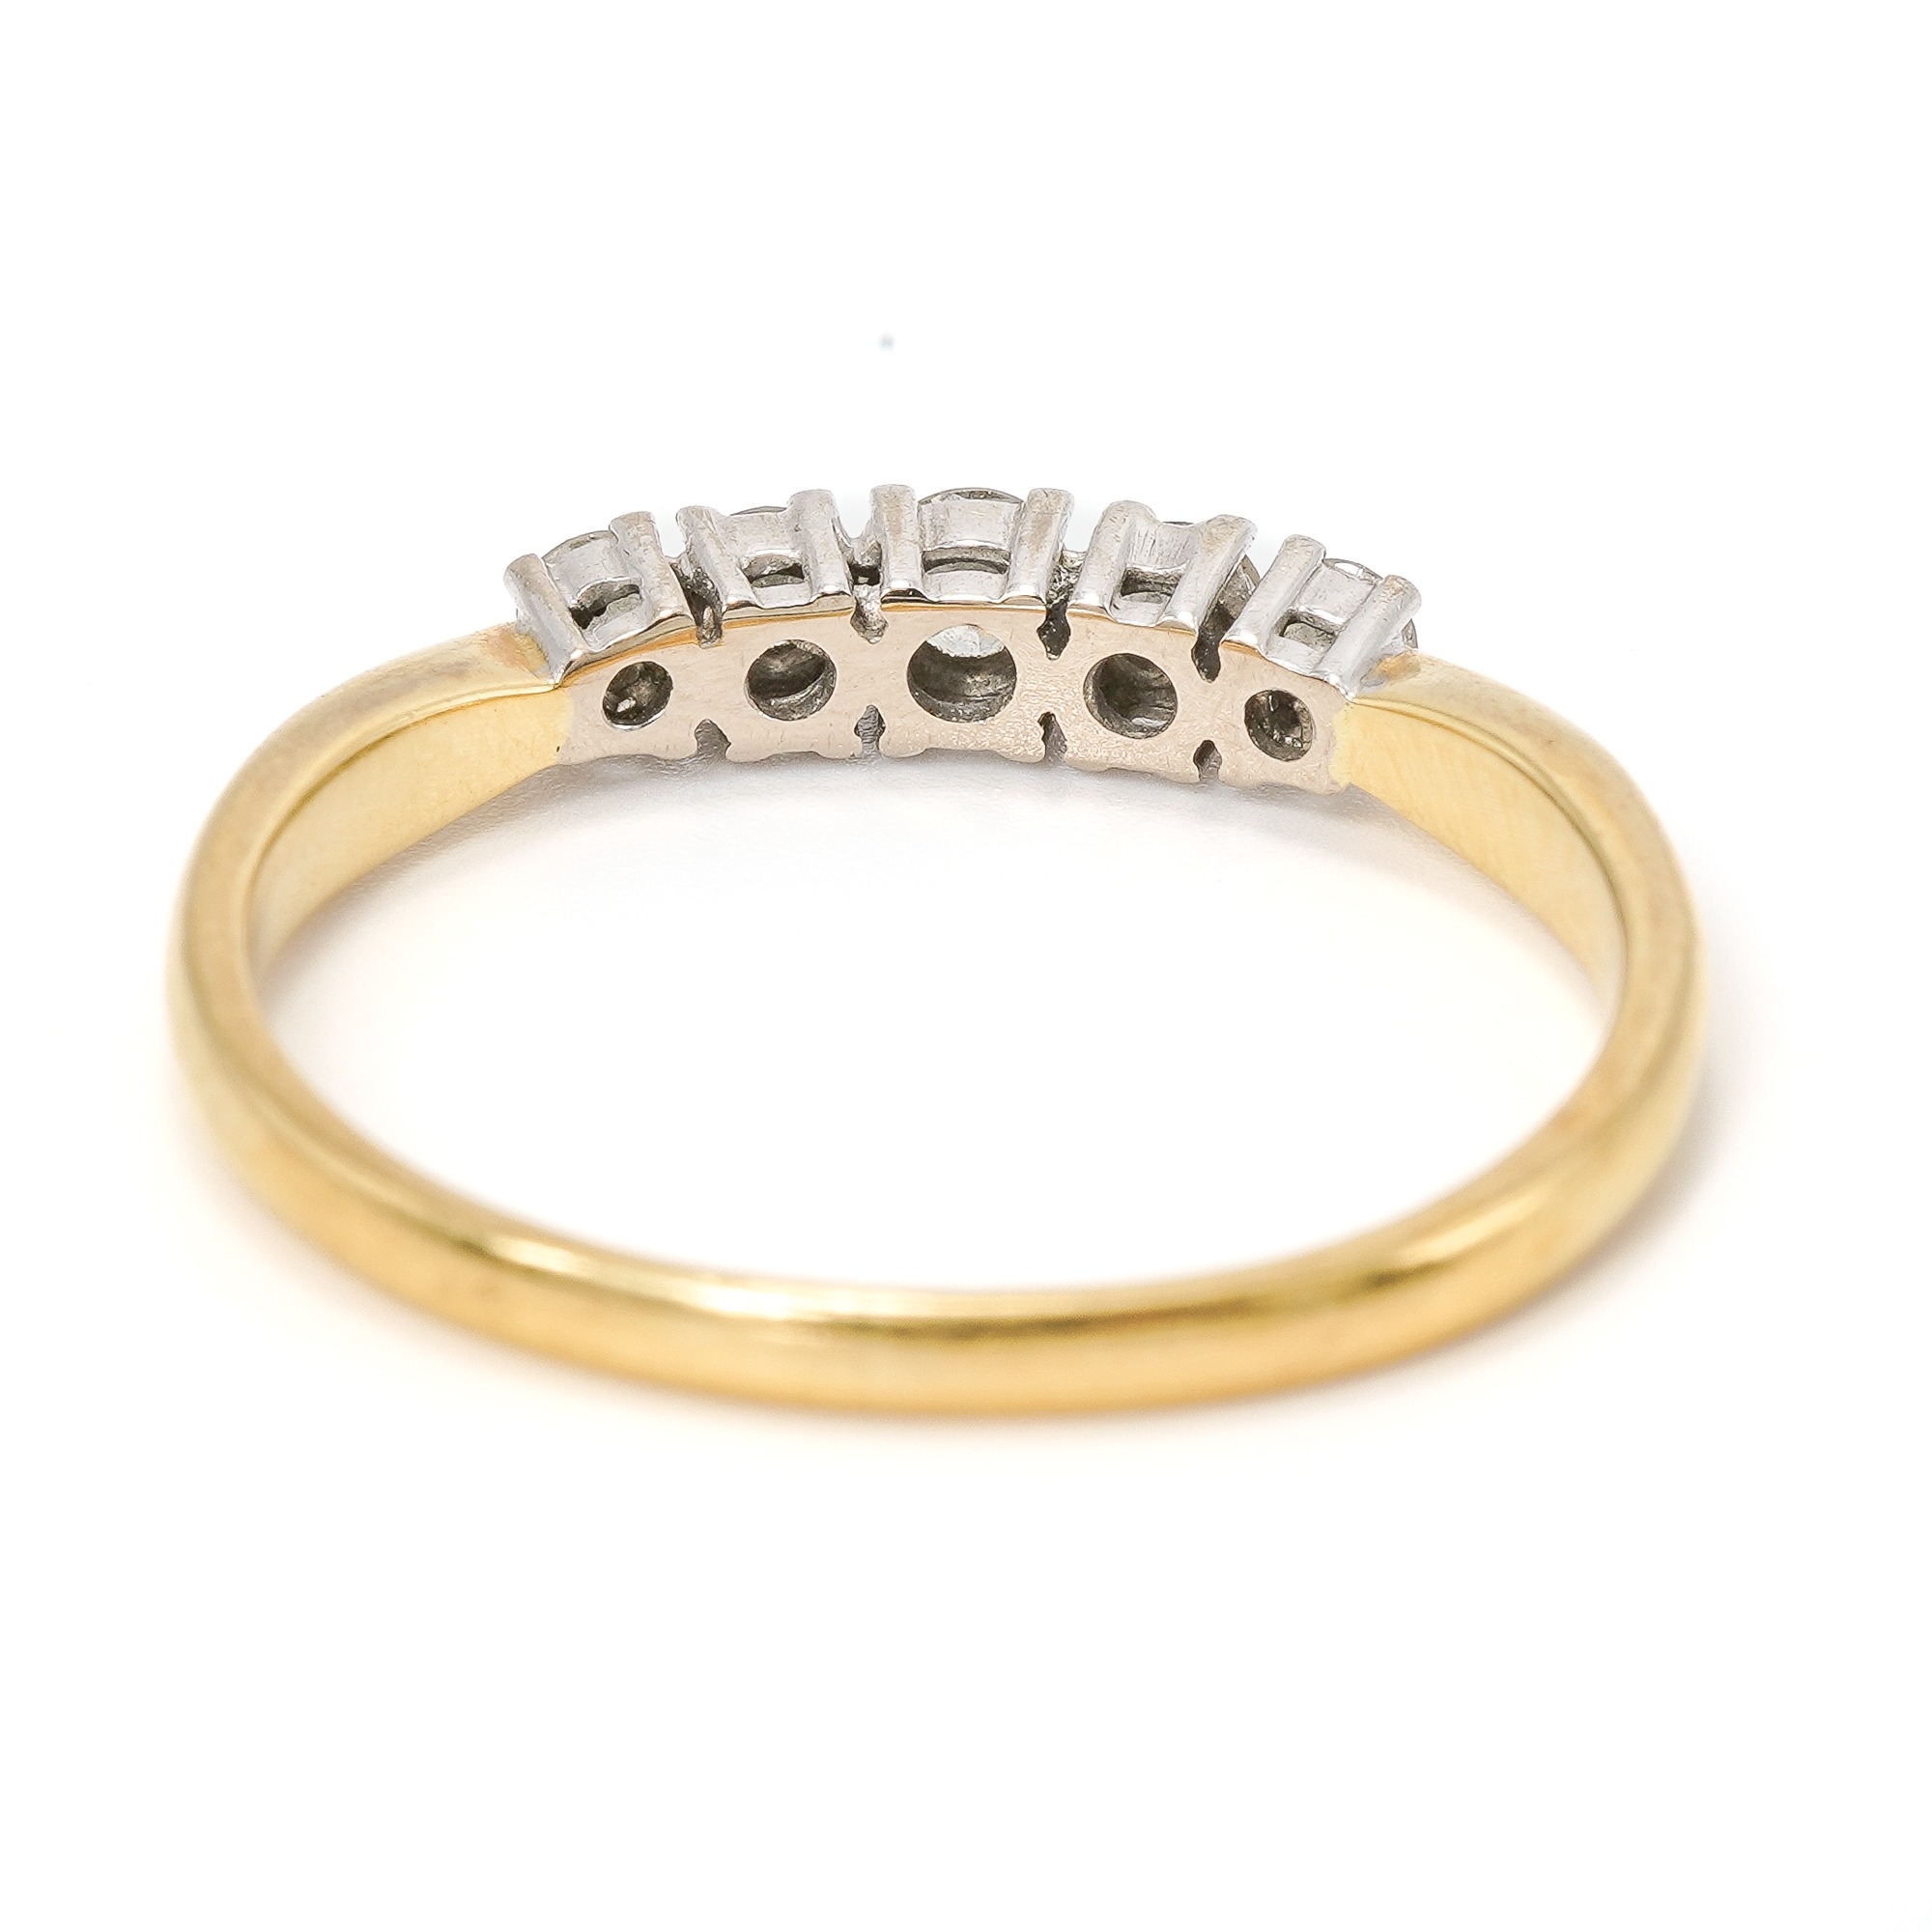 An 18ct yellow gold and diamond five stone ring, set with graduated round brilliant cut diamonds, - Image 4 of 5